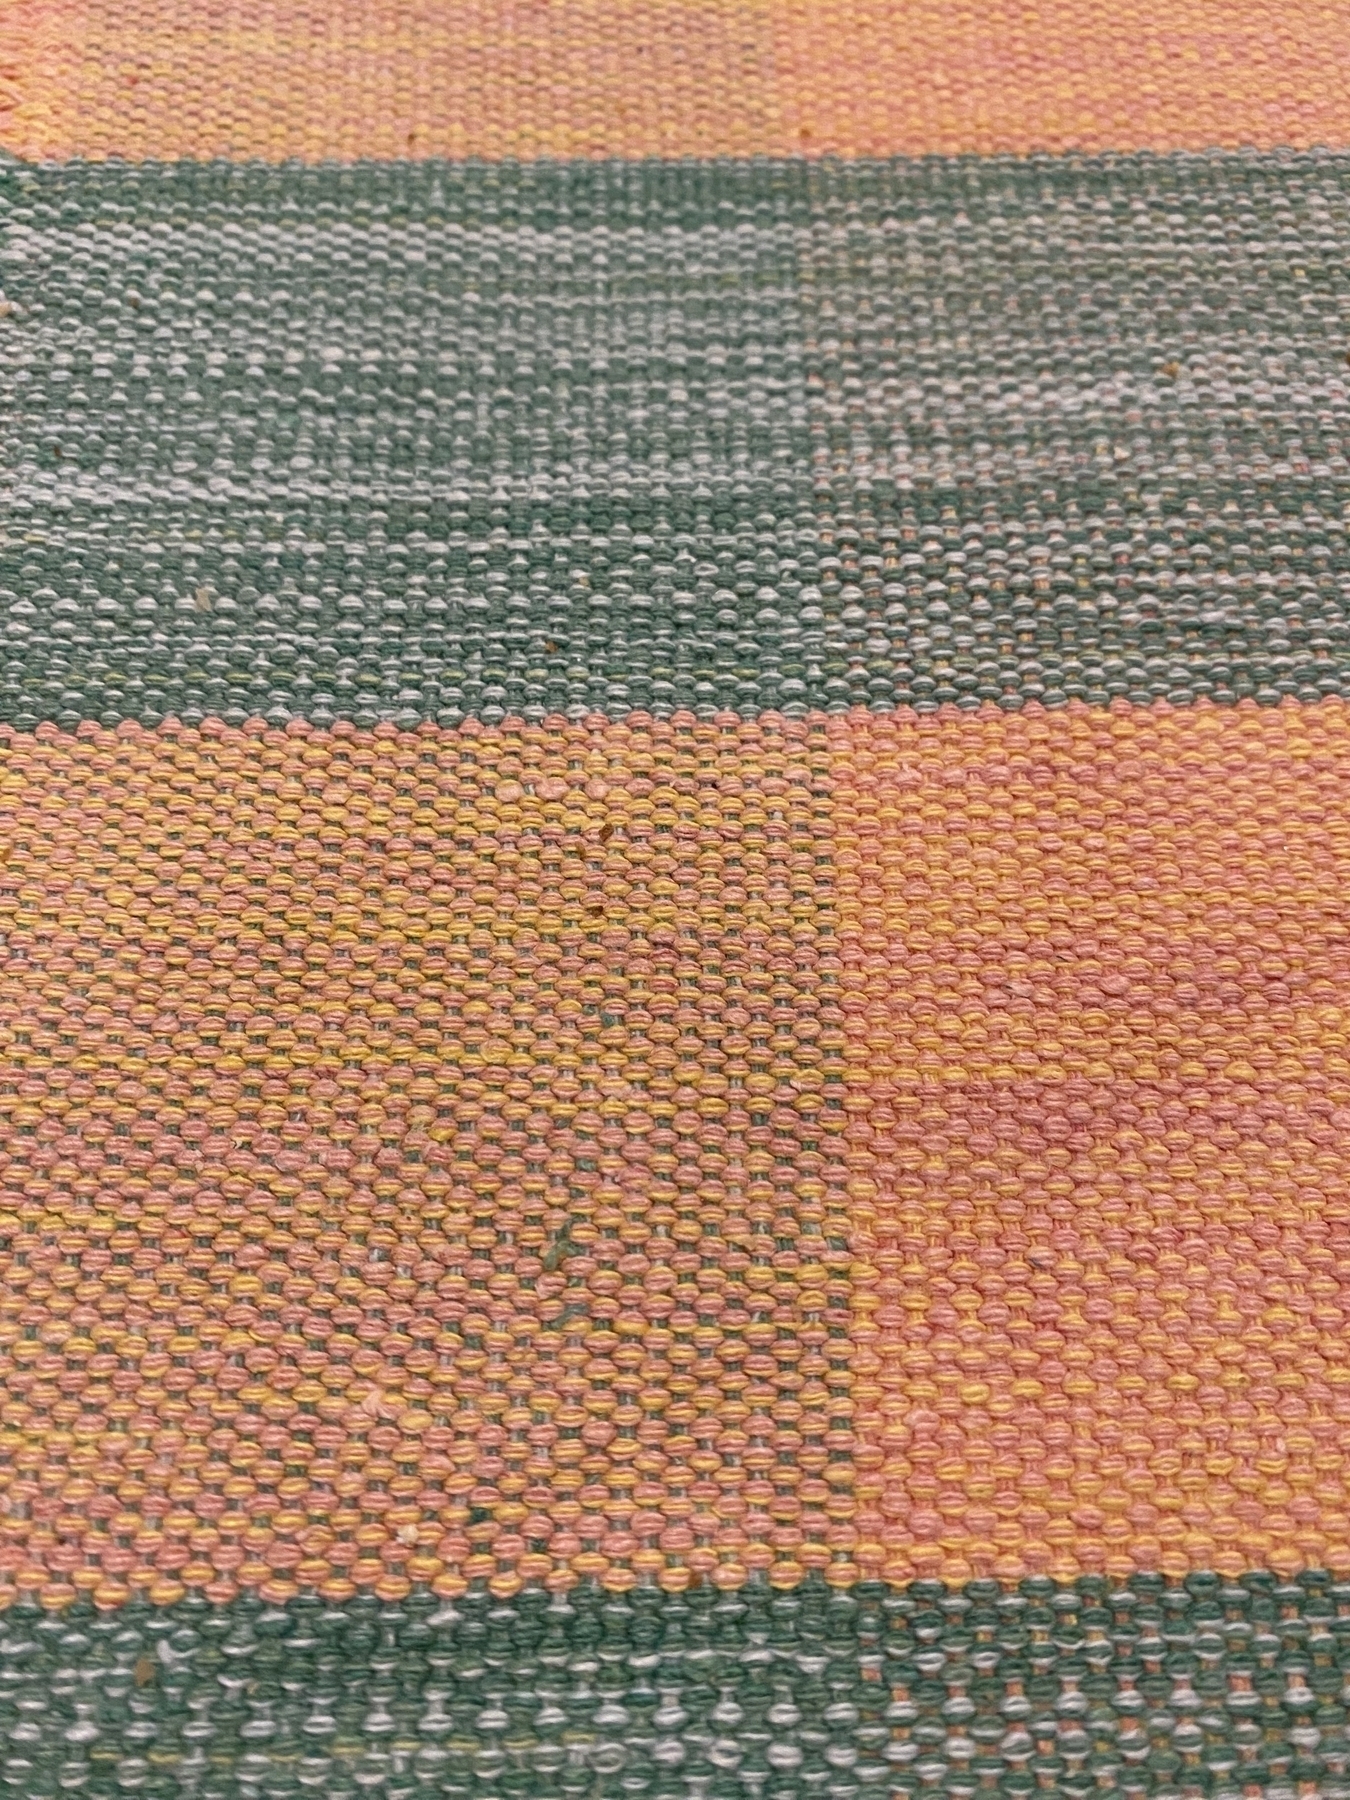 Green and orange line with a visible texture of string threads 